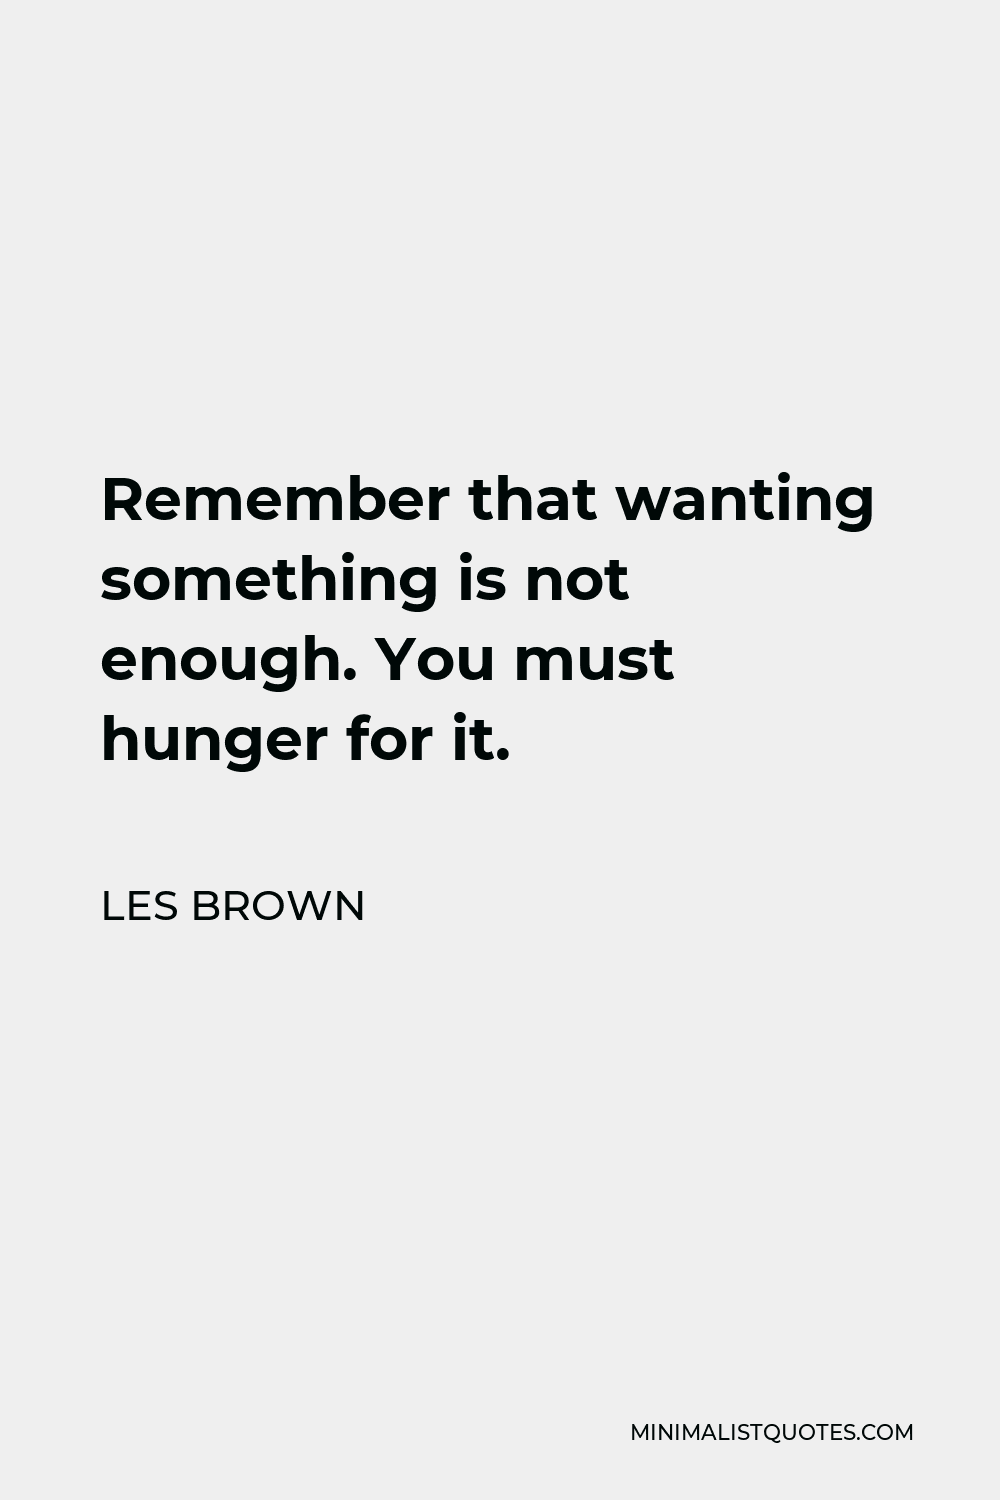 Les Brown Quote - Remember that wanting something is not enough. You must hunger for it.